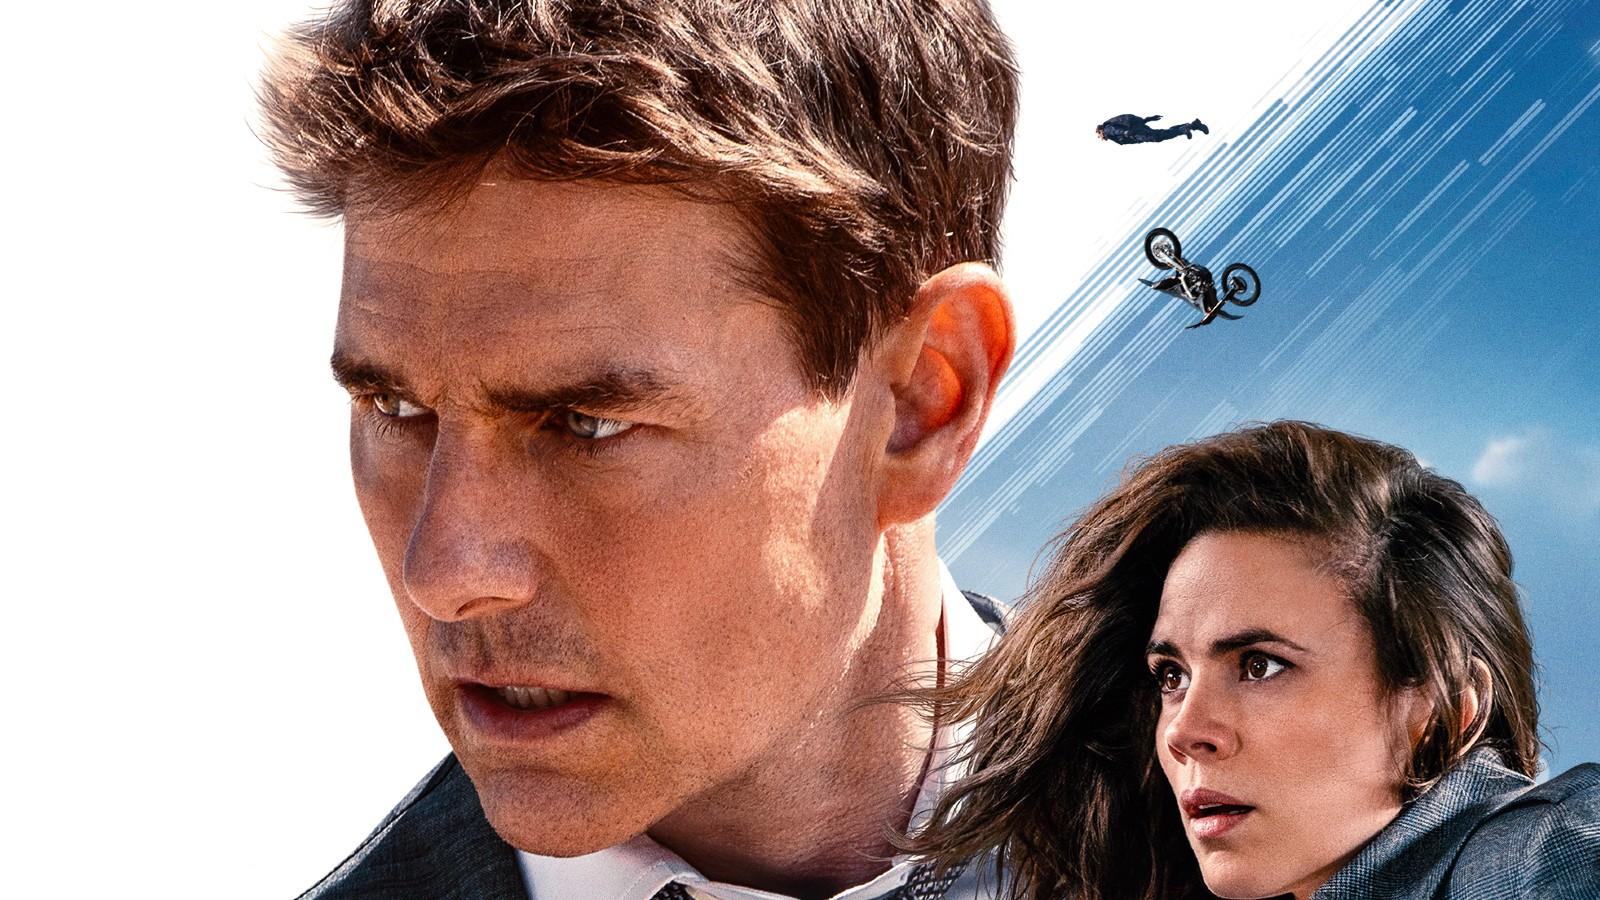 Tom Cruise and Haley Atwell on the poster for Mission: Impossible Dead Reckoning Part 1